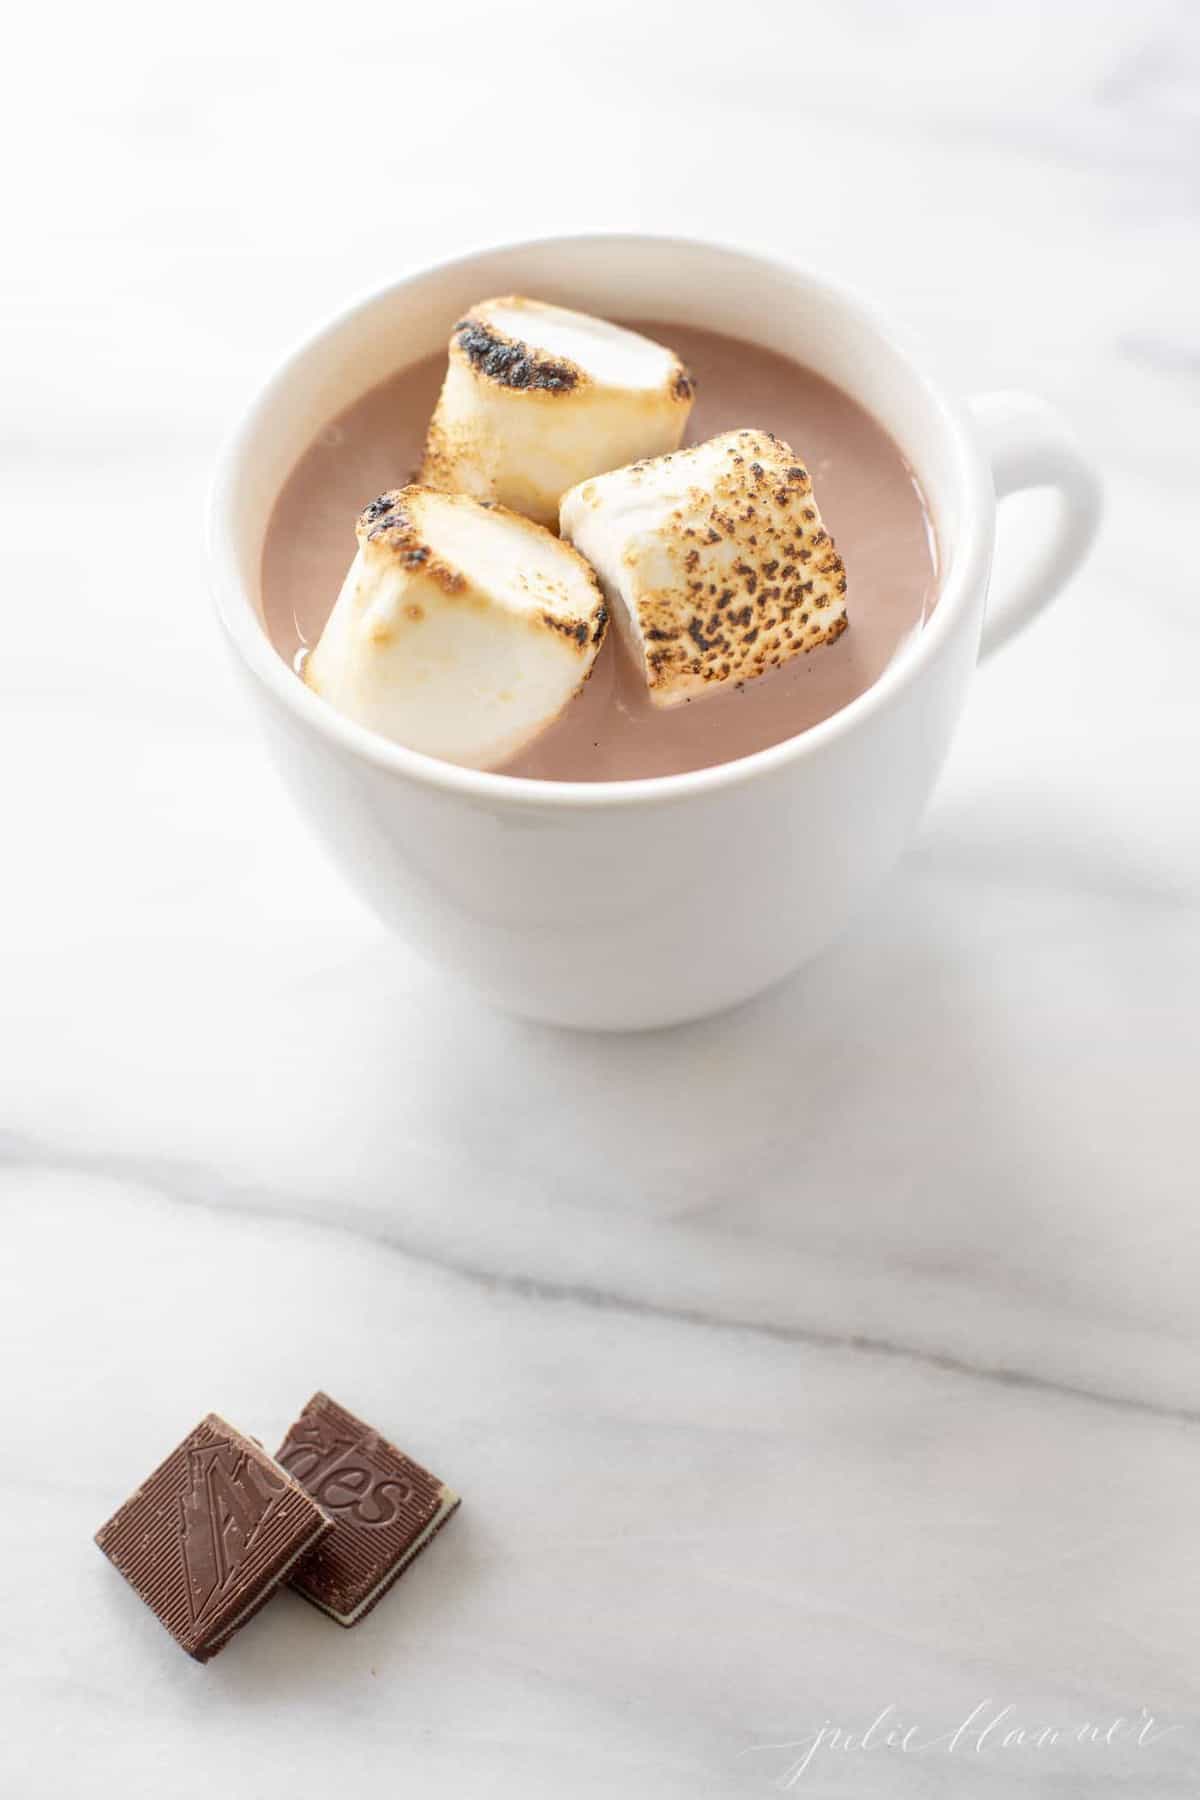 Marble surface, white mug of spiked hot chocolate, marshmallows on top and mint chocolate bar to the side.